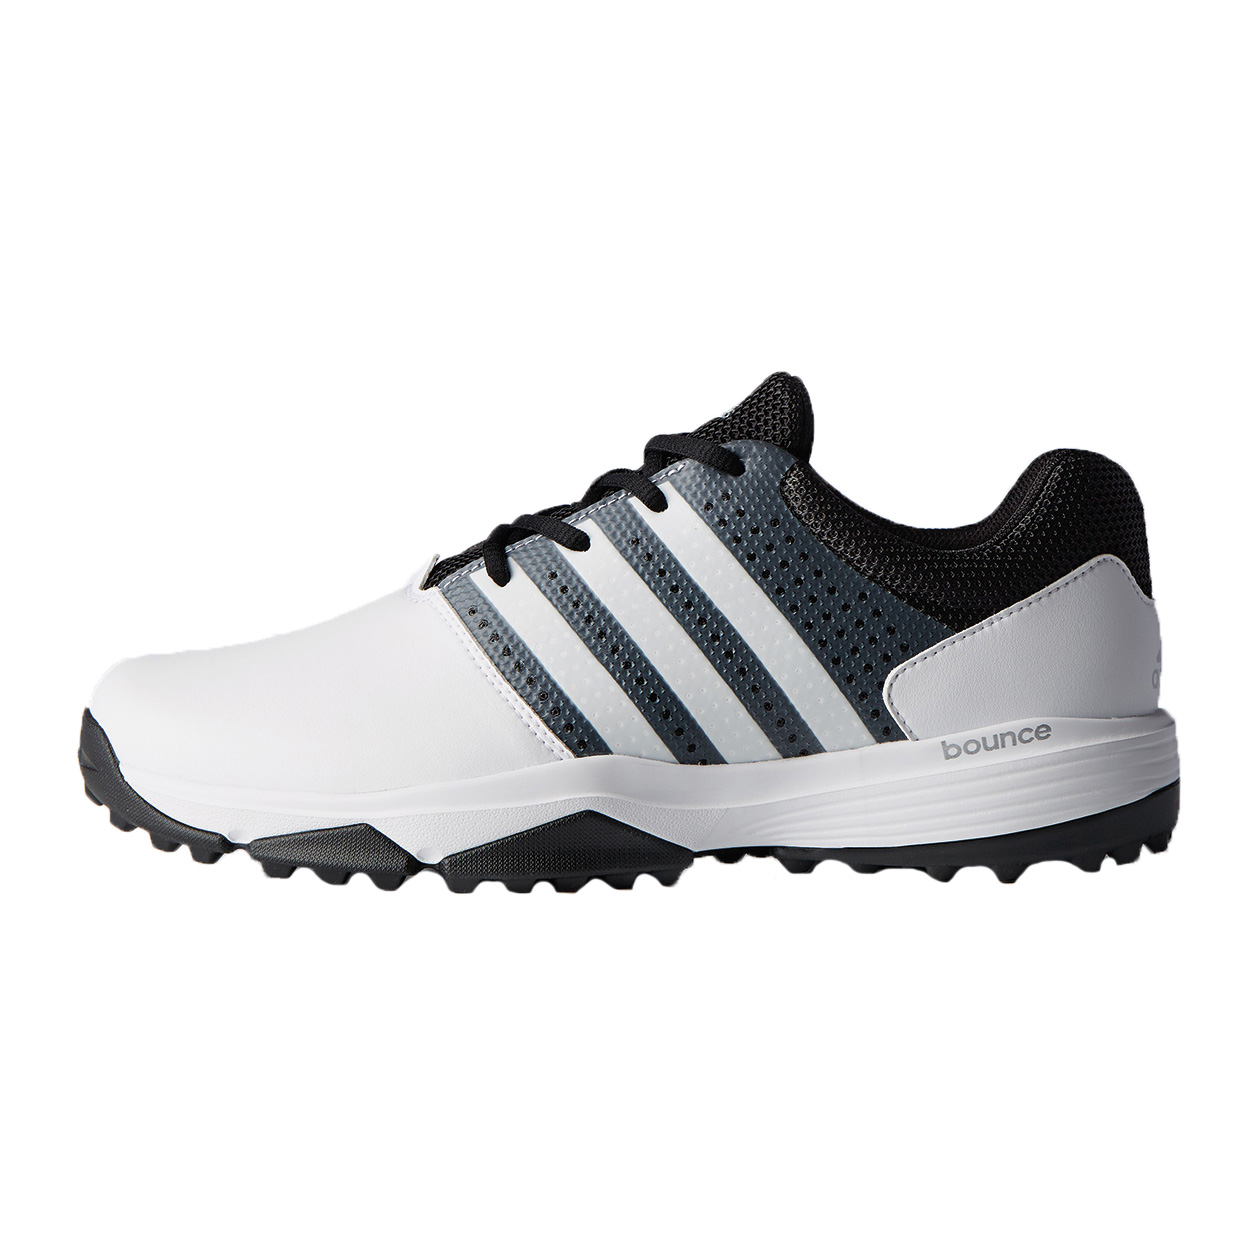 adidas 360 traxion spikeless golf shoes